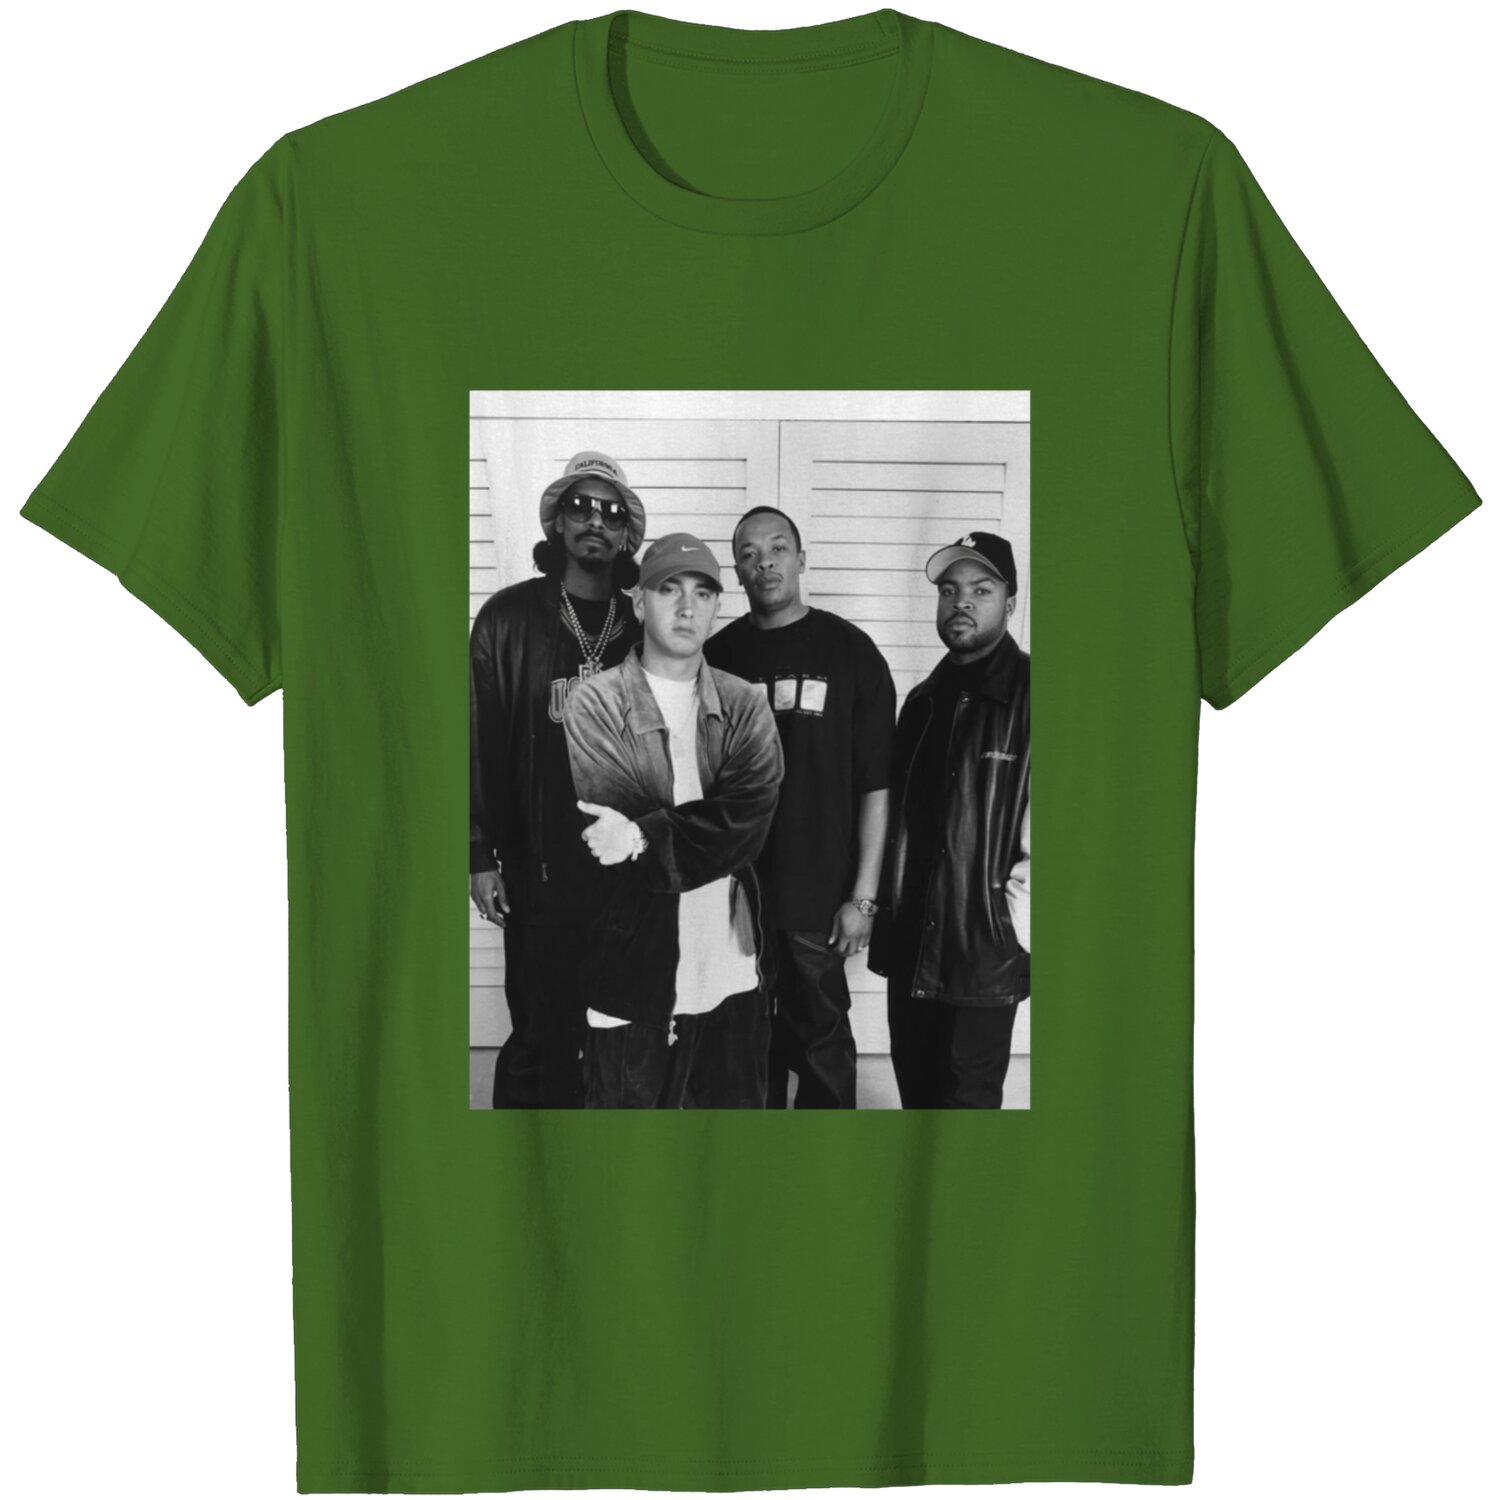 Legends of Hip Hop Vintage Graphic Tee featuring Eminem, Dr. Dre, Ice Cube, and Snoop Dogg DZT02